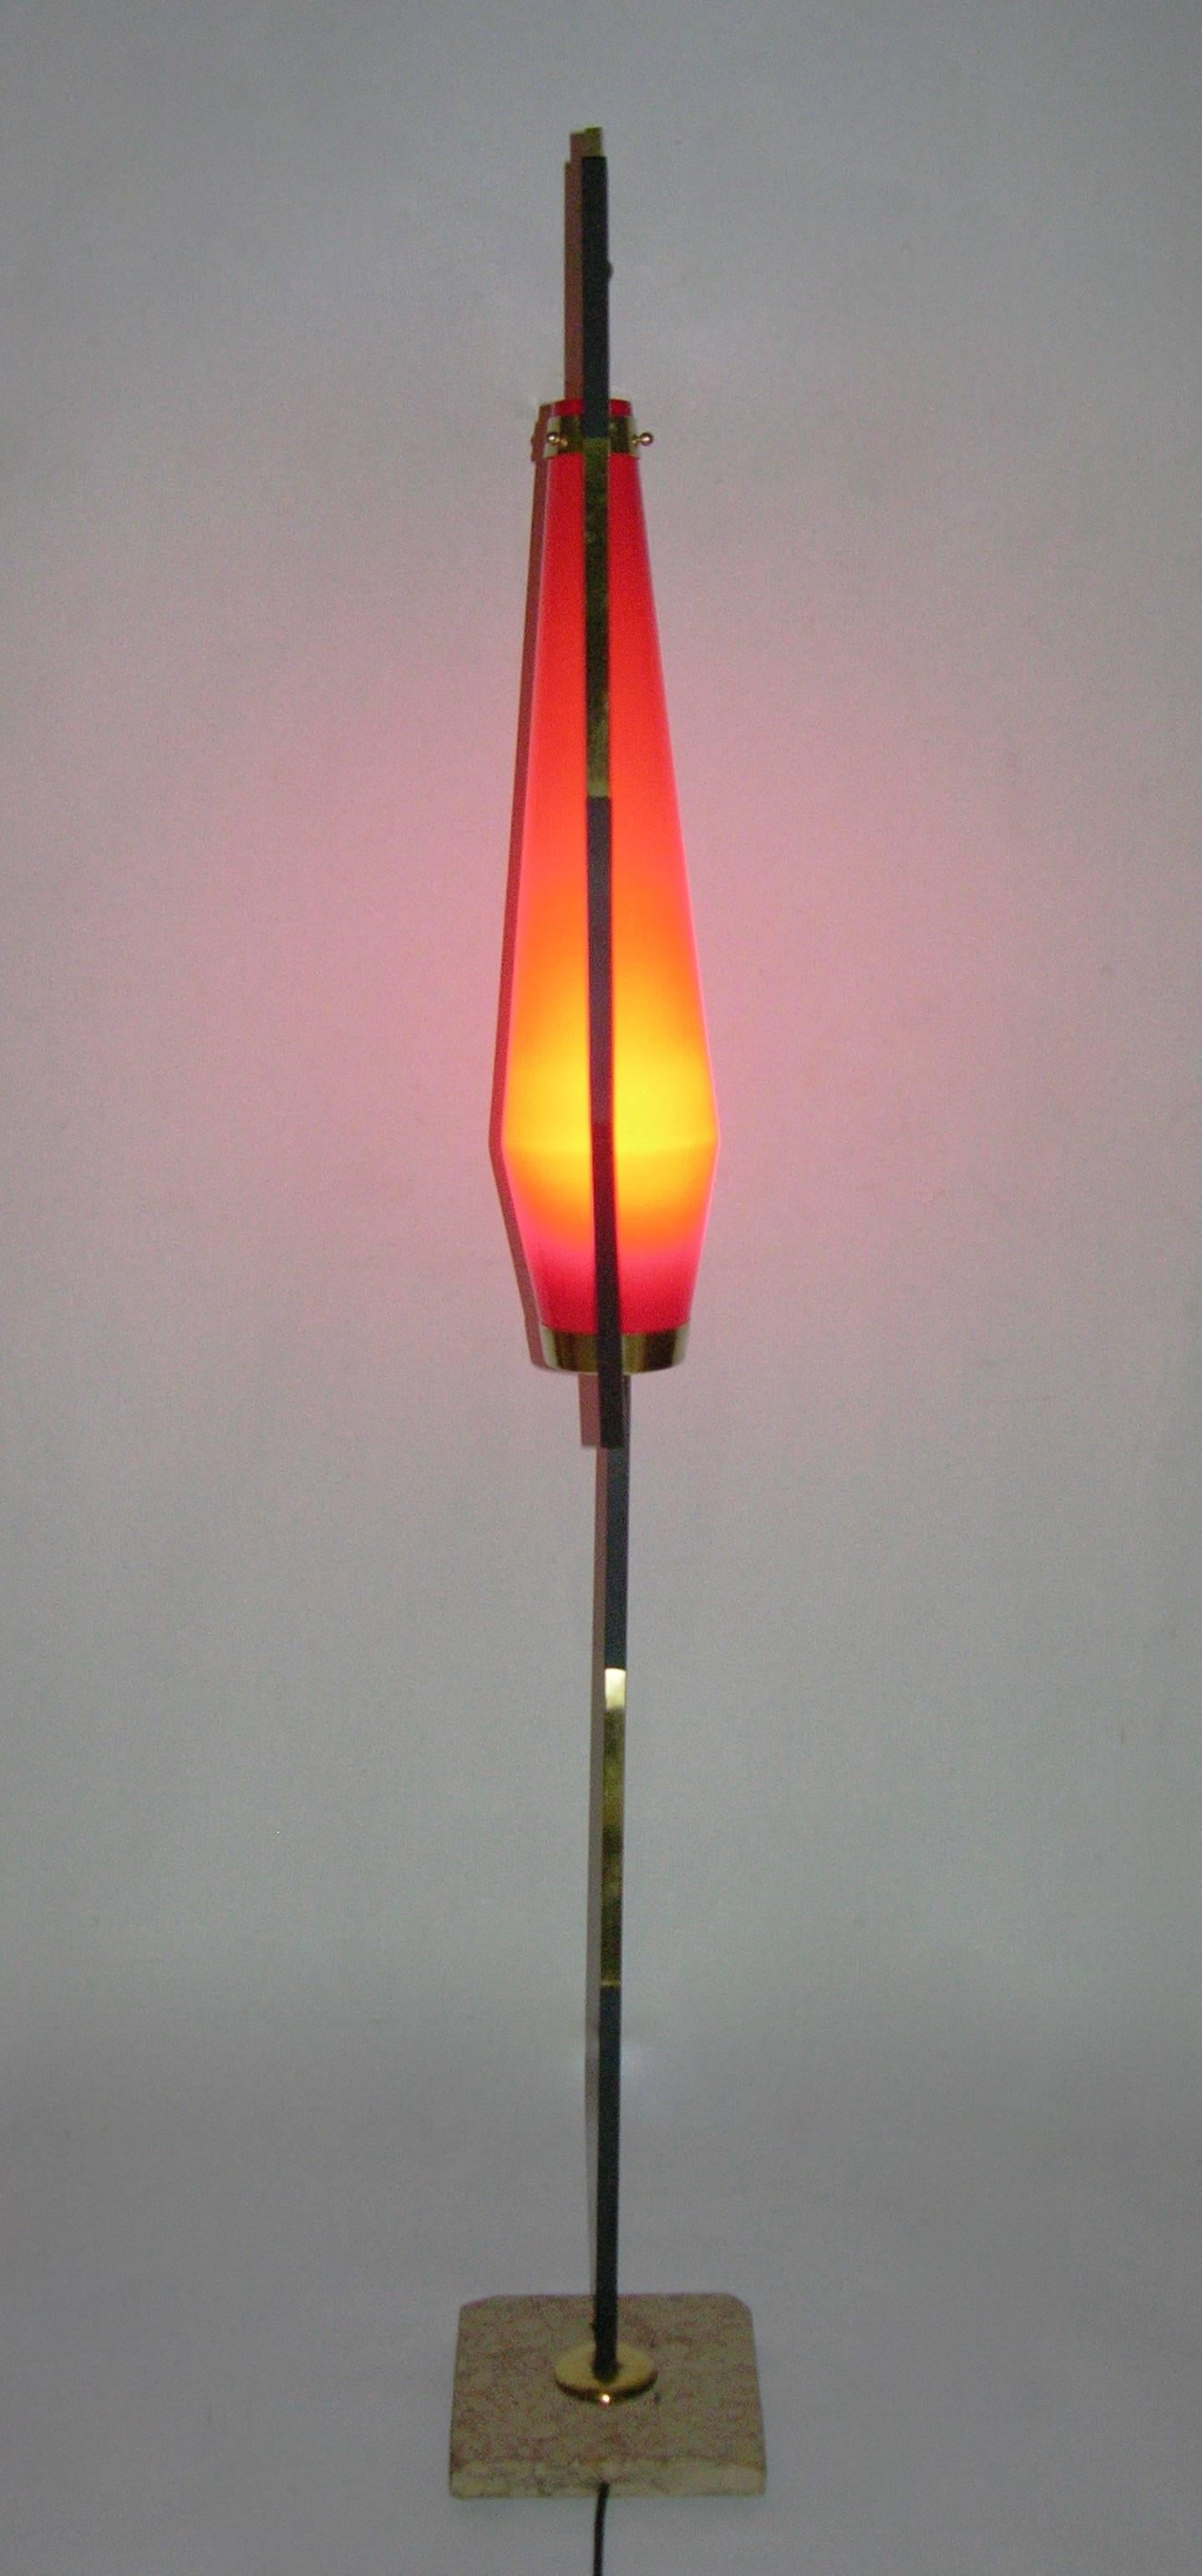 1950s Vintage Italian Floor Lamp with Red Murano Glass Shade In Excellent Condition For Sale In New York, NY